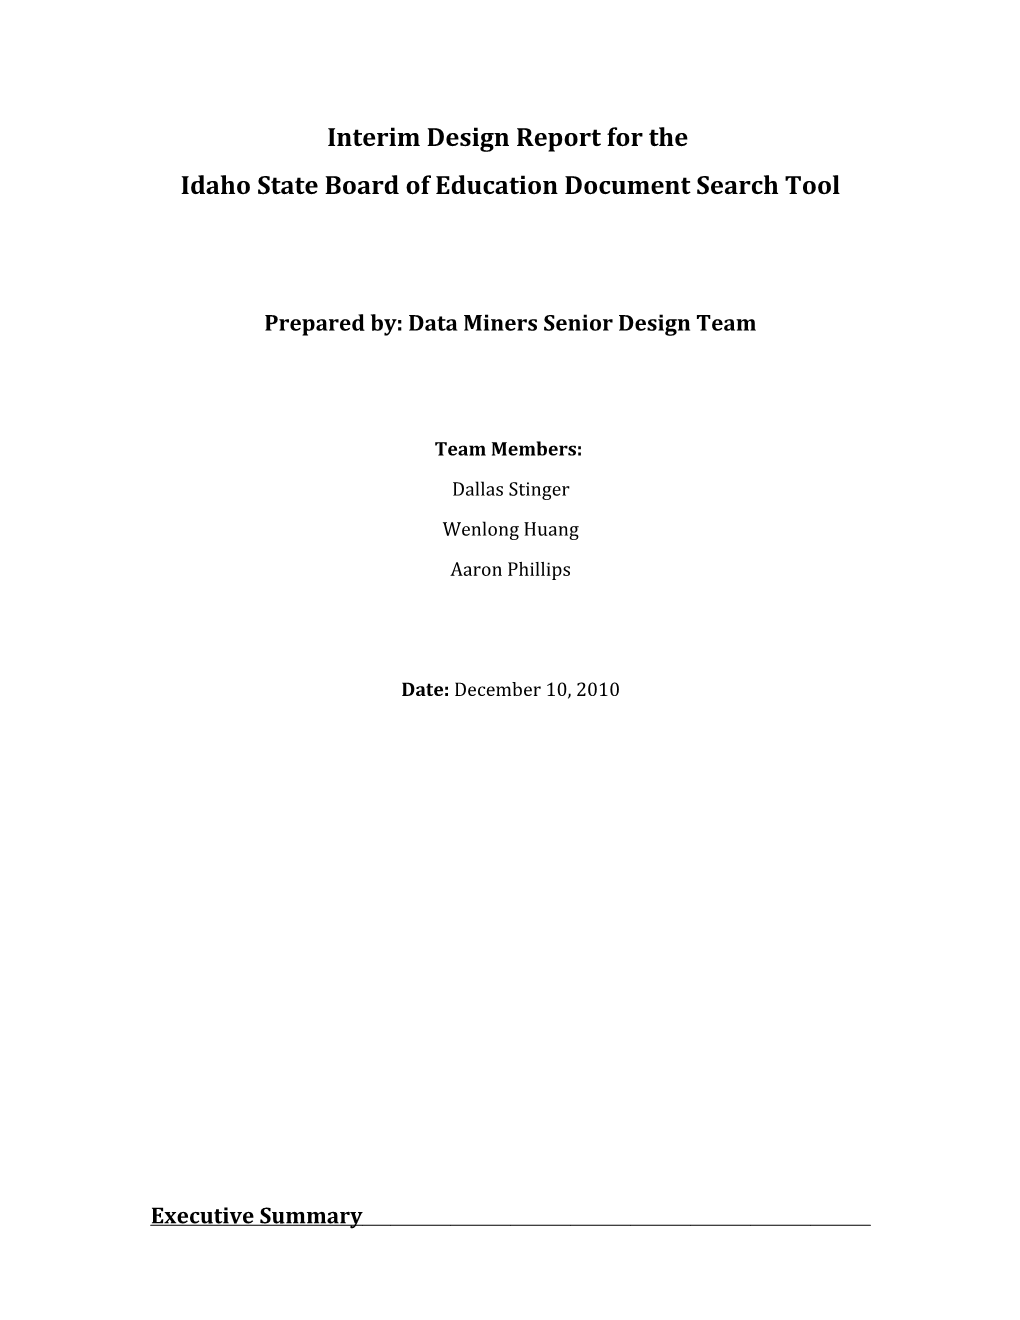 Idaho State Board of Education Document Search Tool